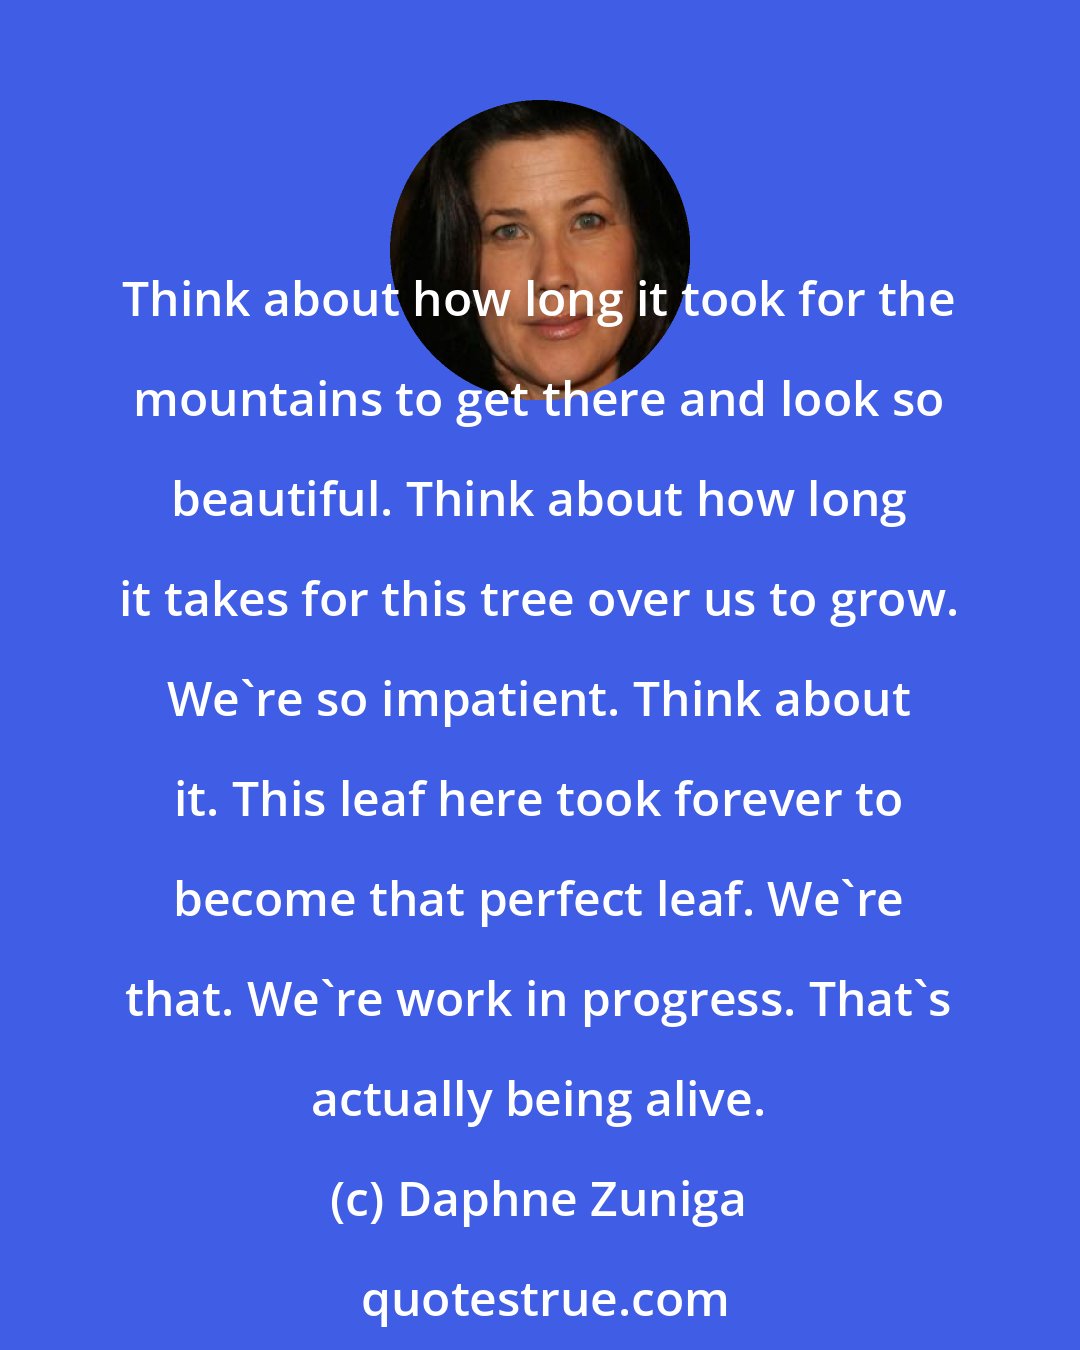 Daphne Zuniga: Think about how long it took for the mountains to get there and look so beautiful. Think about how long it takes for this tree over us to grow. We're so impatient. Think about it. This leaf here took forever to become that perfect leaf. We're that. We're work in progress. That's actually being alive.